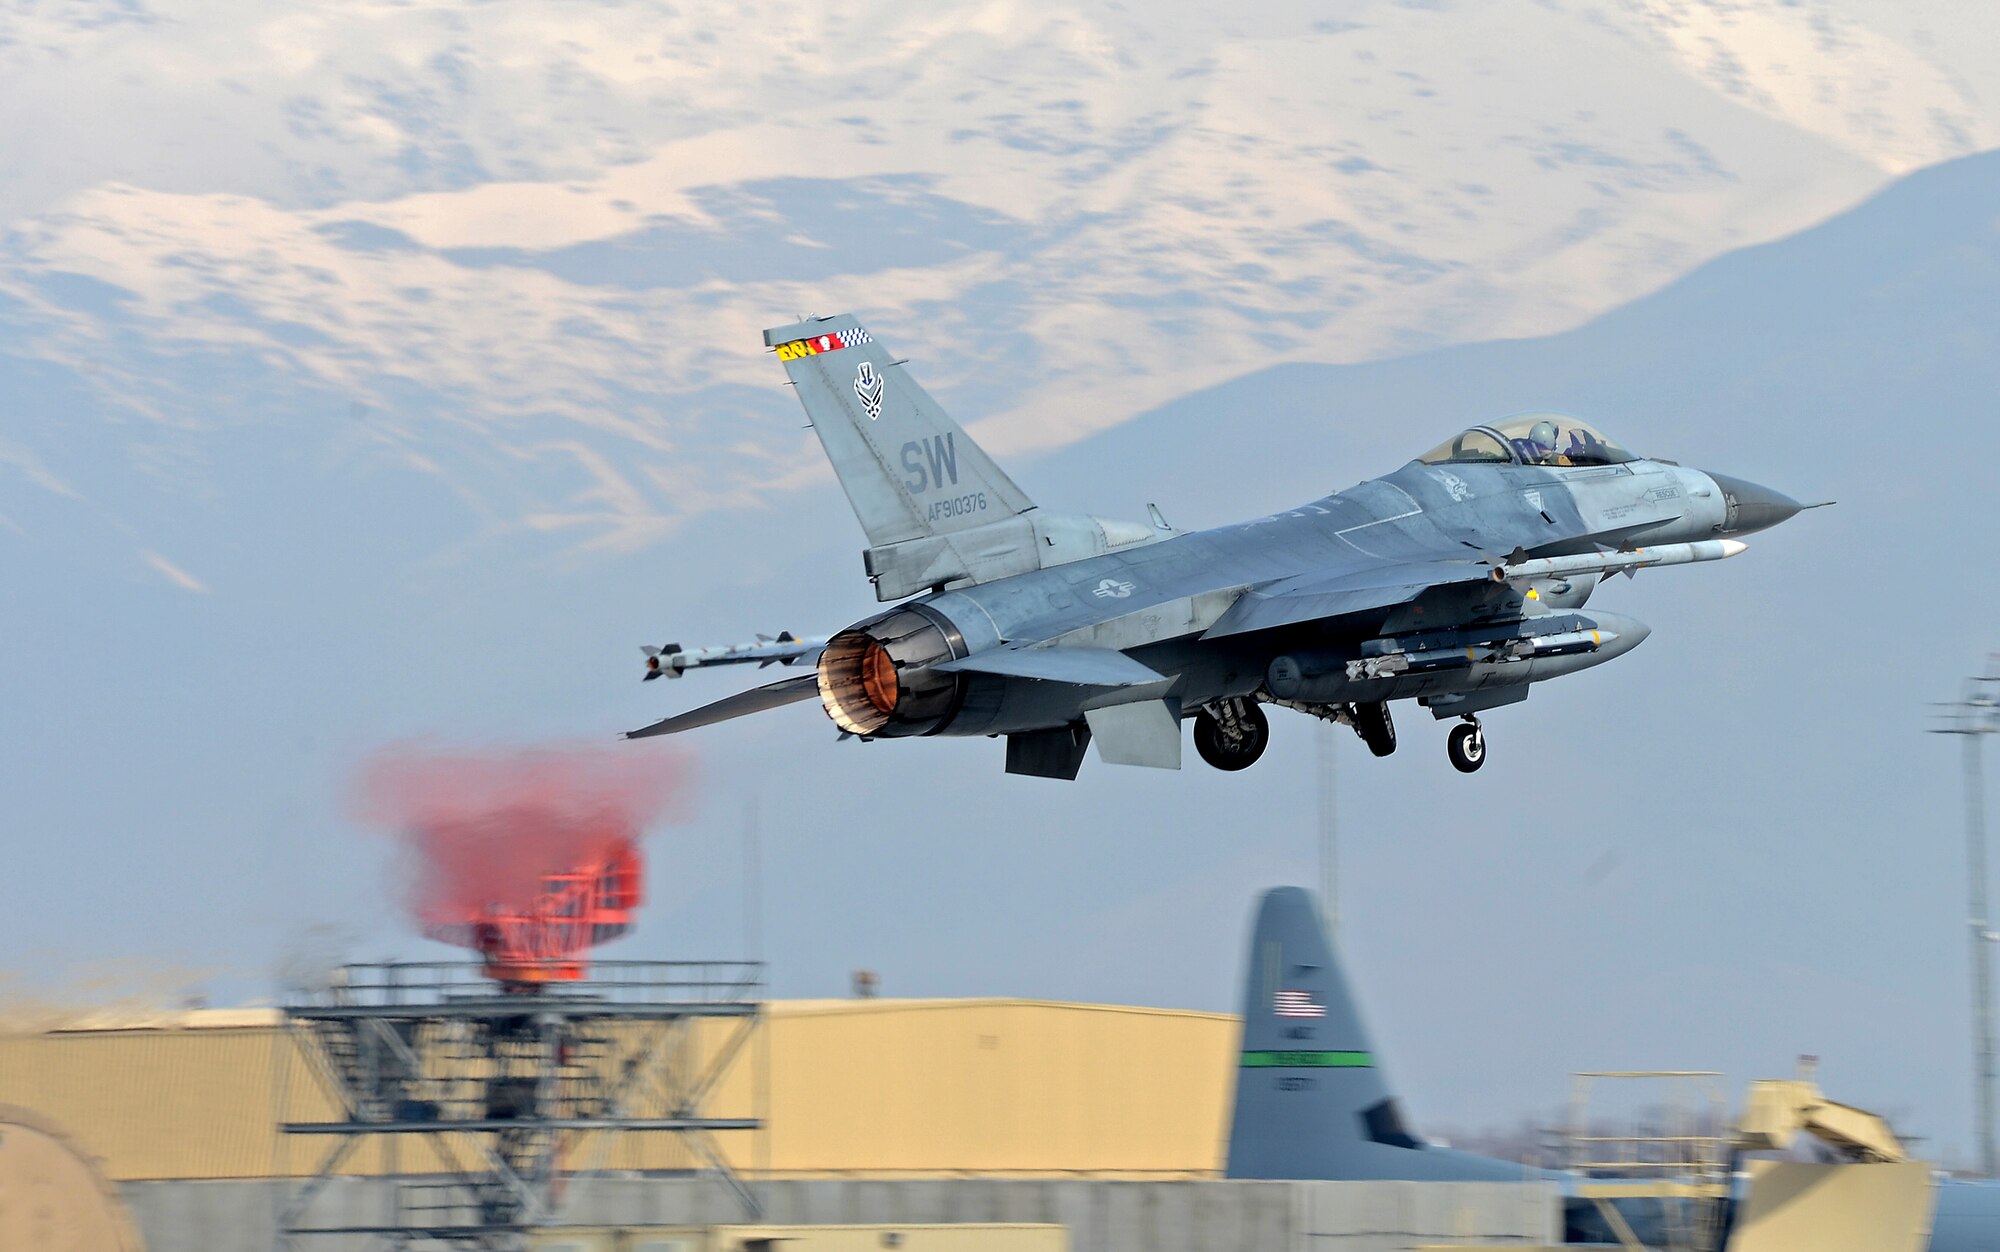 “Mach” (center), 77th Expeditionary Fighter Squadron F-16 Fighting Falcon fighter pilot, takes off from Bagram Airfield, Afghanistan Feb. 28, 2018.